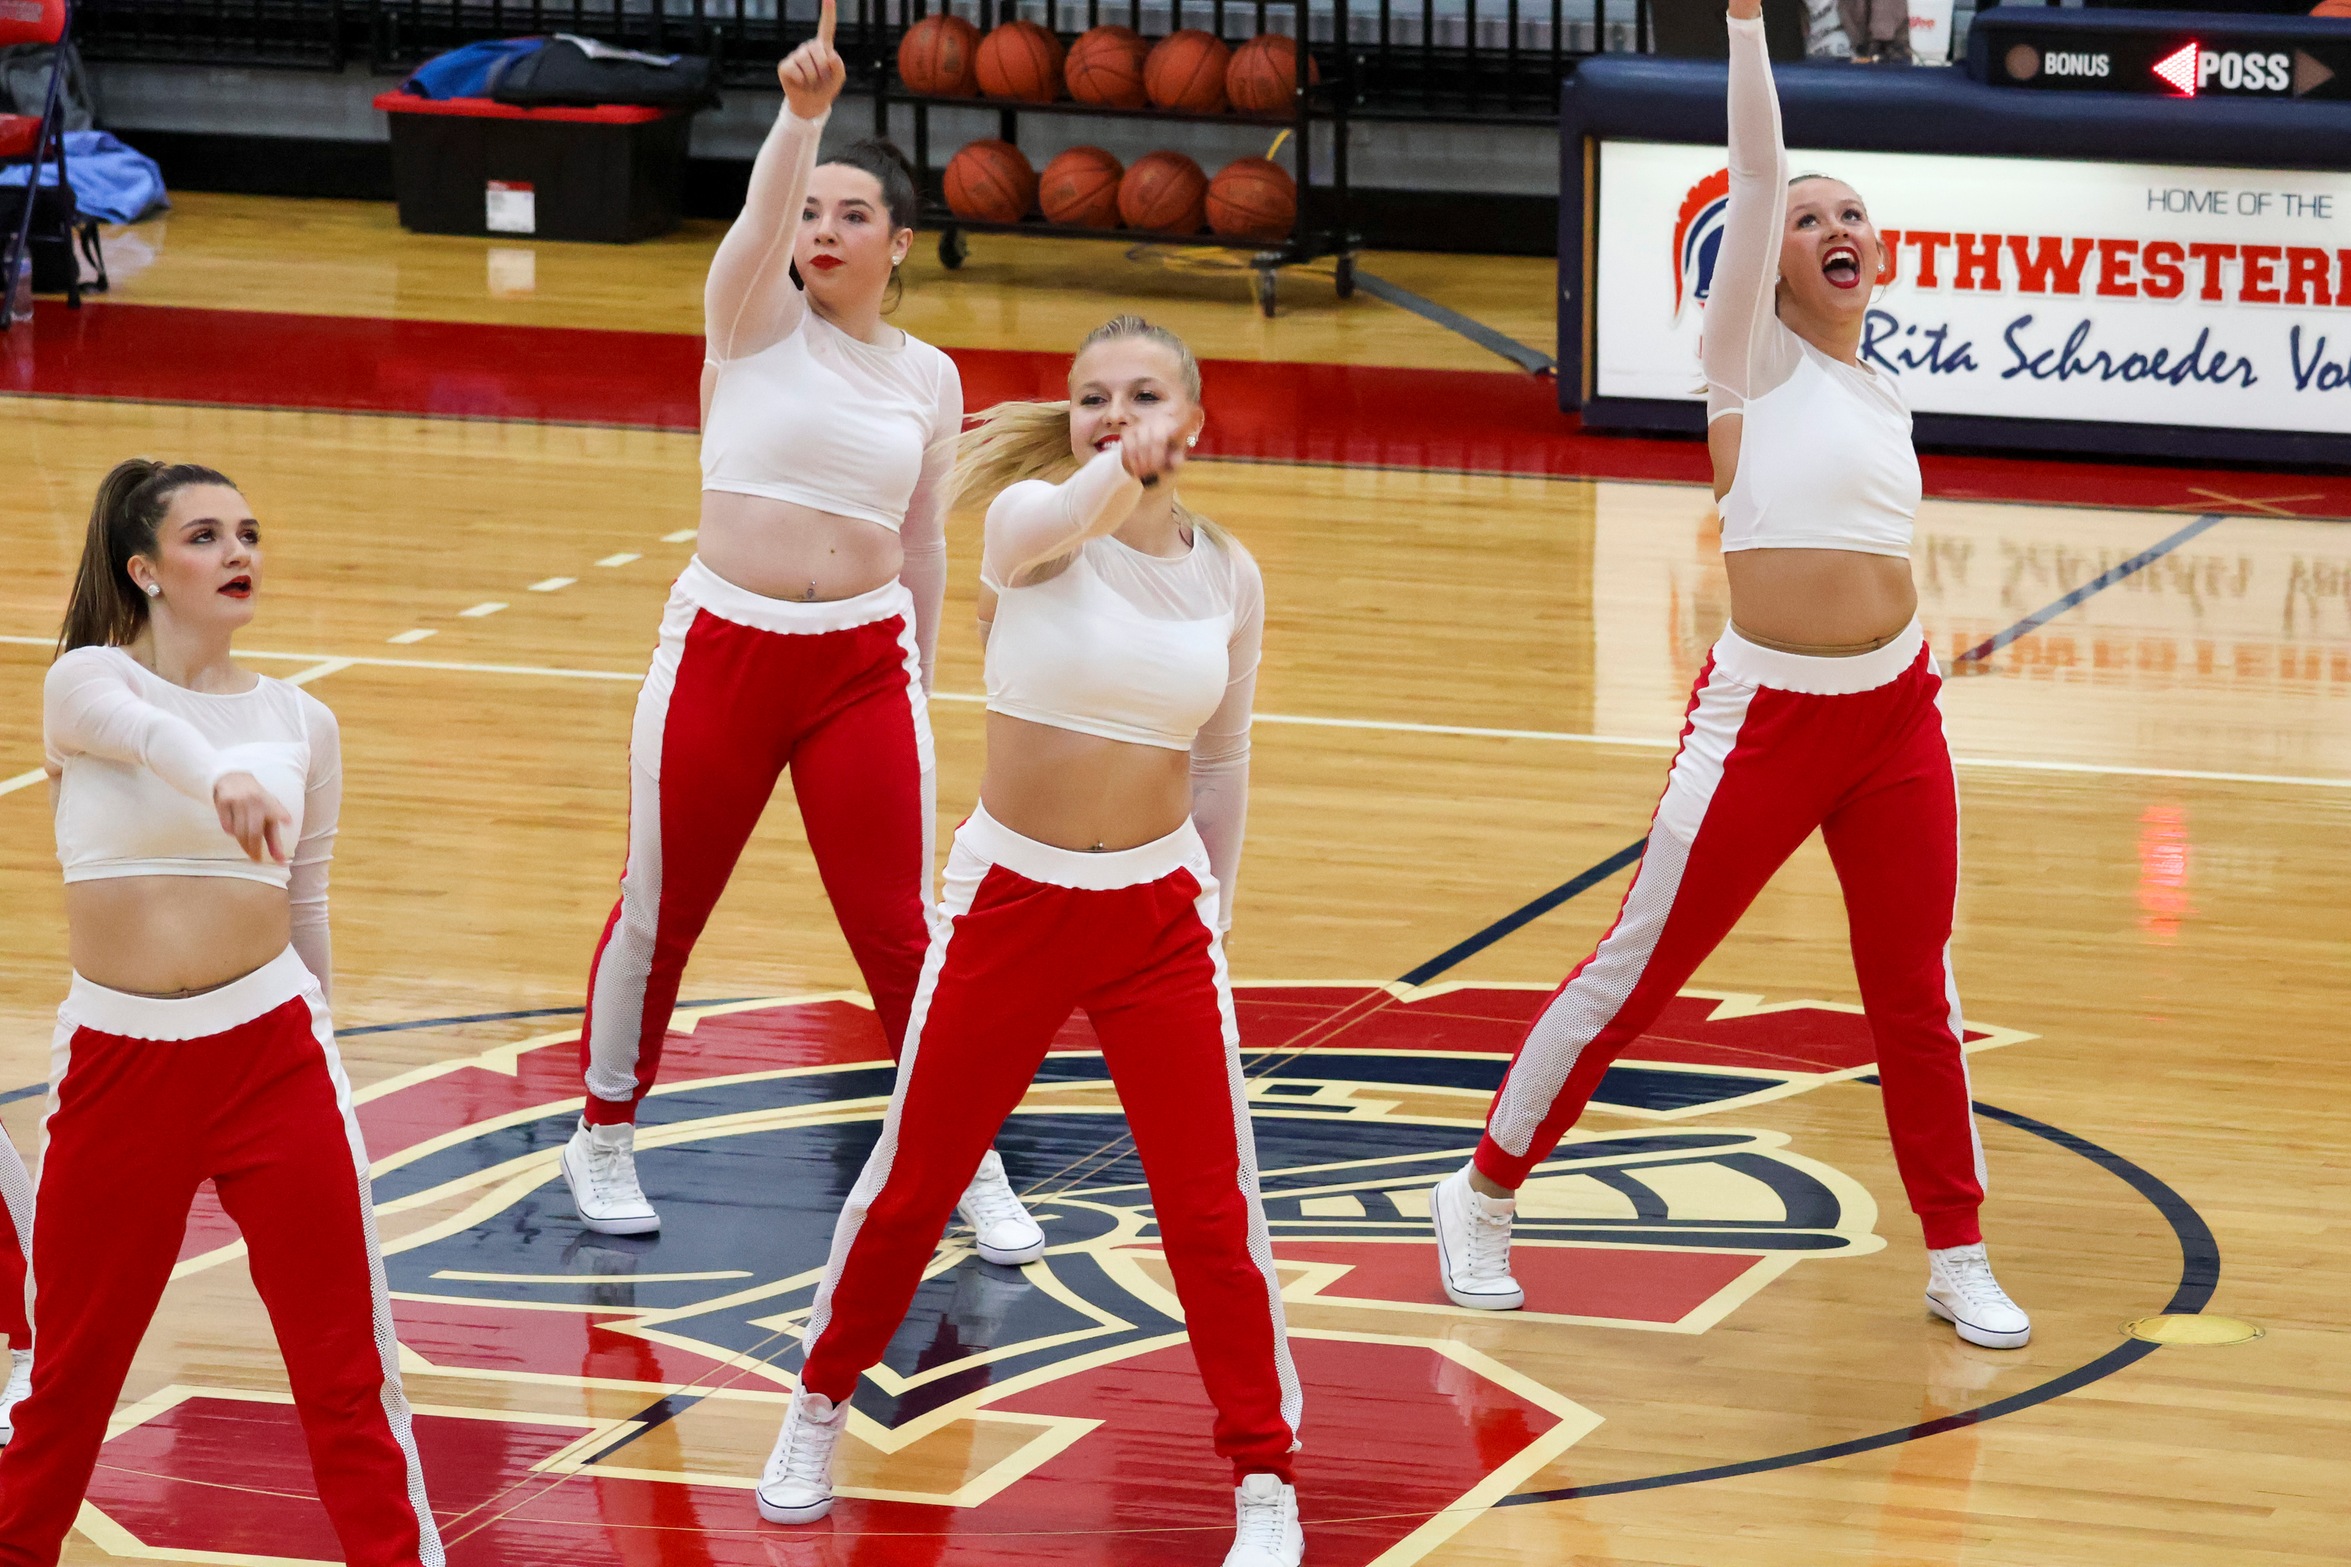 SWCC DANCE TEAM SHINES AT THE DANCE CHALLENGE